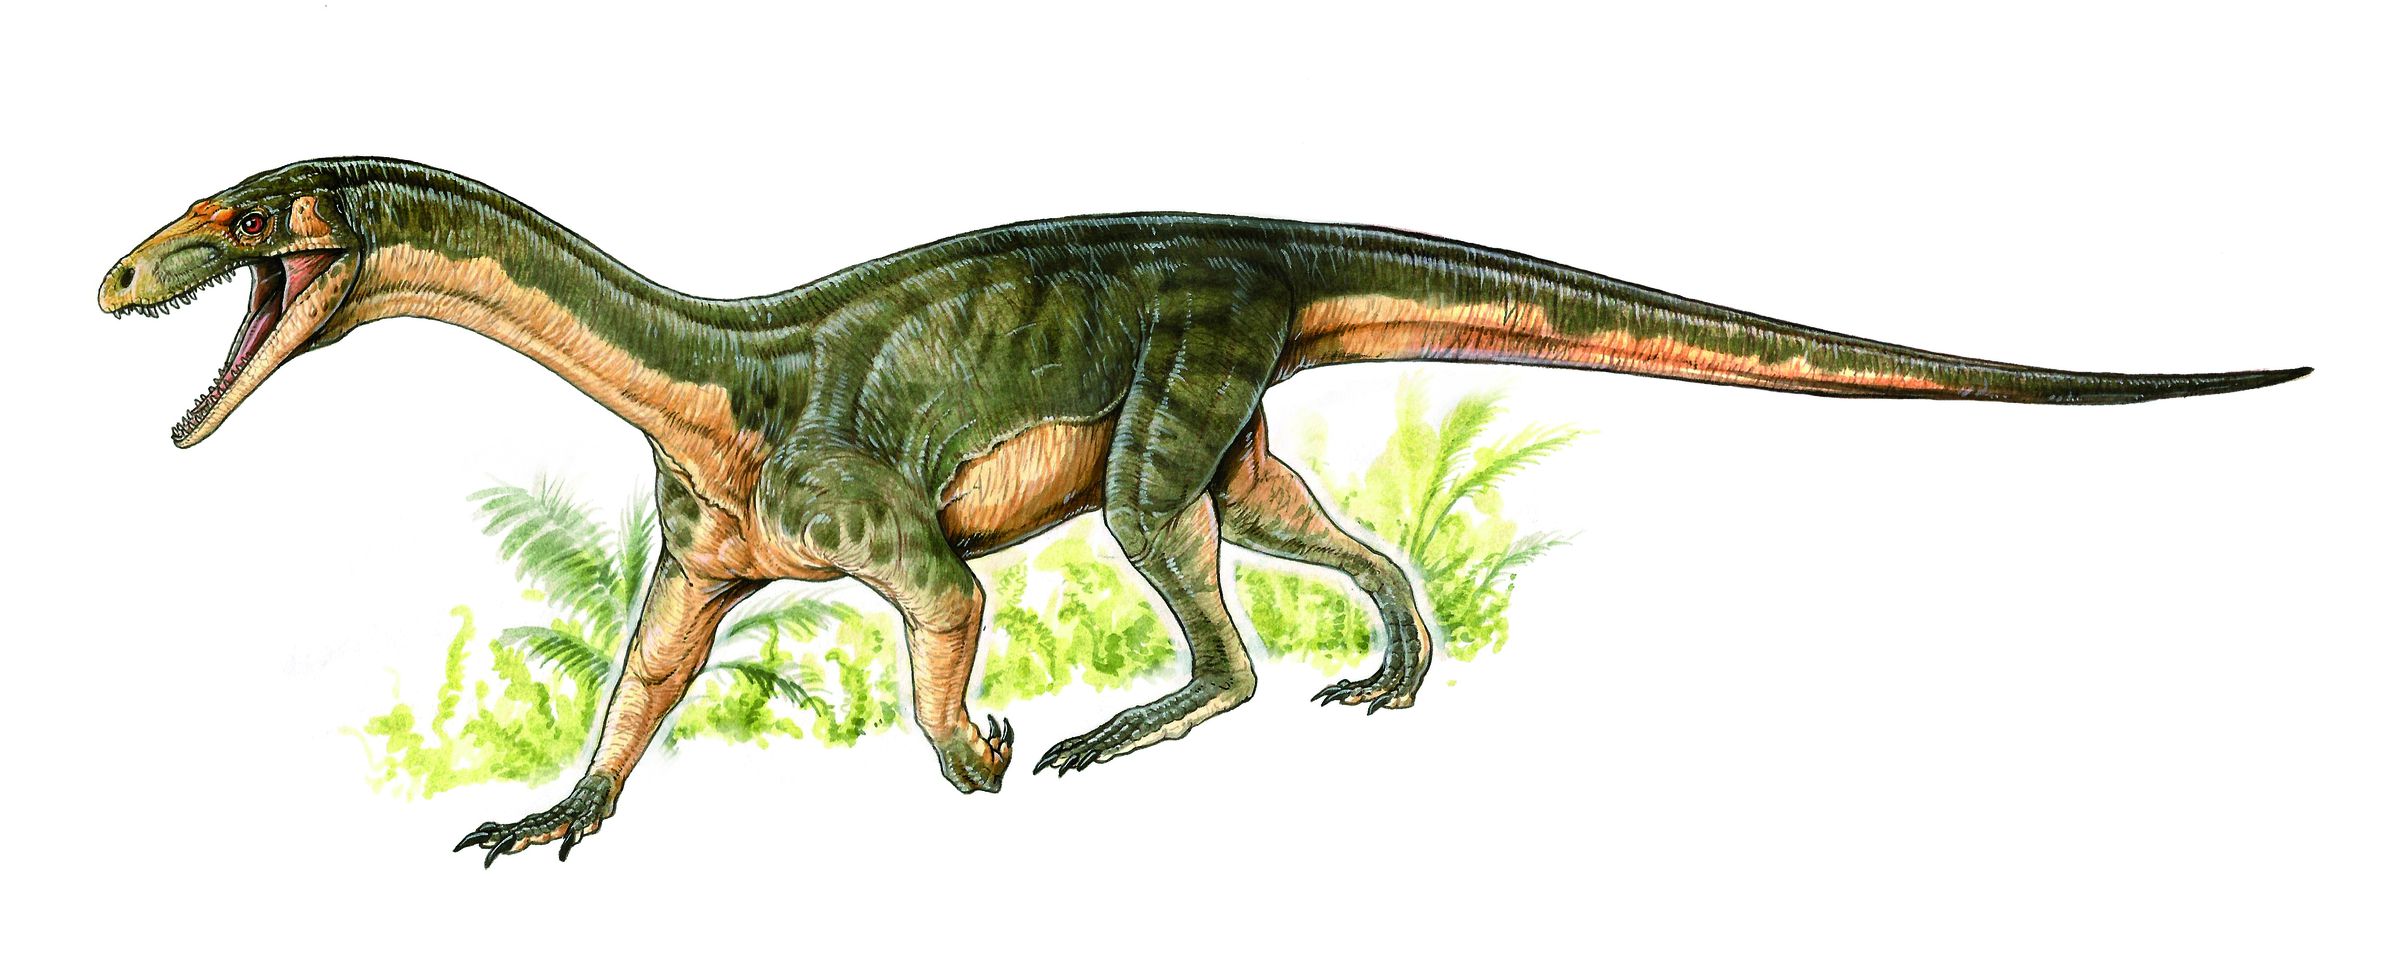 Life reconstruction of the new species Teleocrater rhadinus, a close relative of dinosaurs.